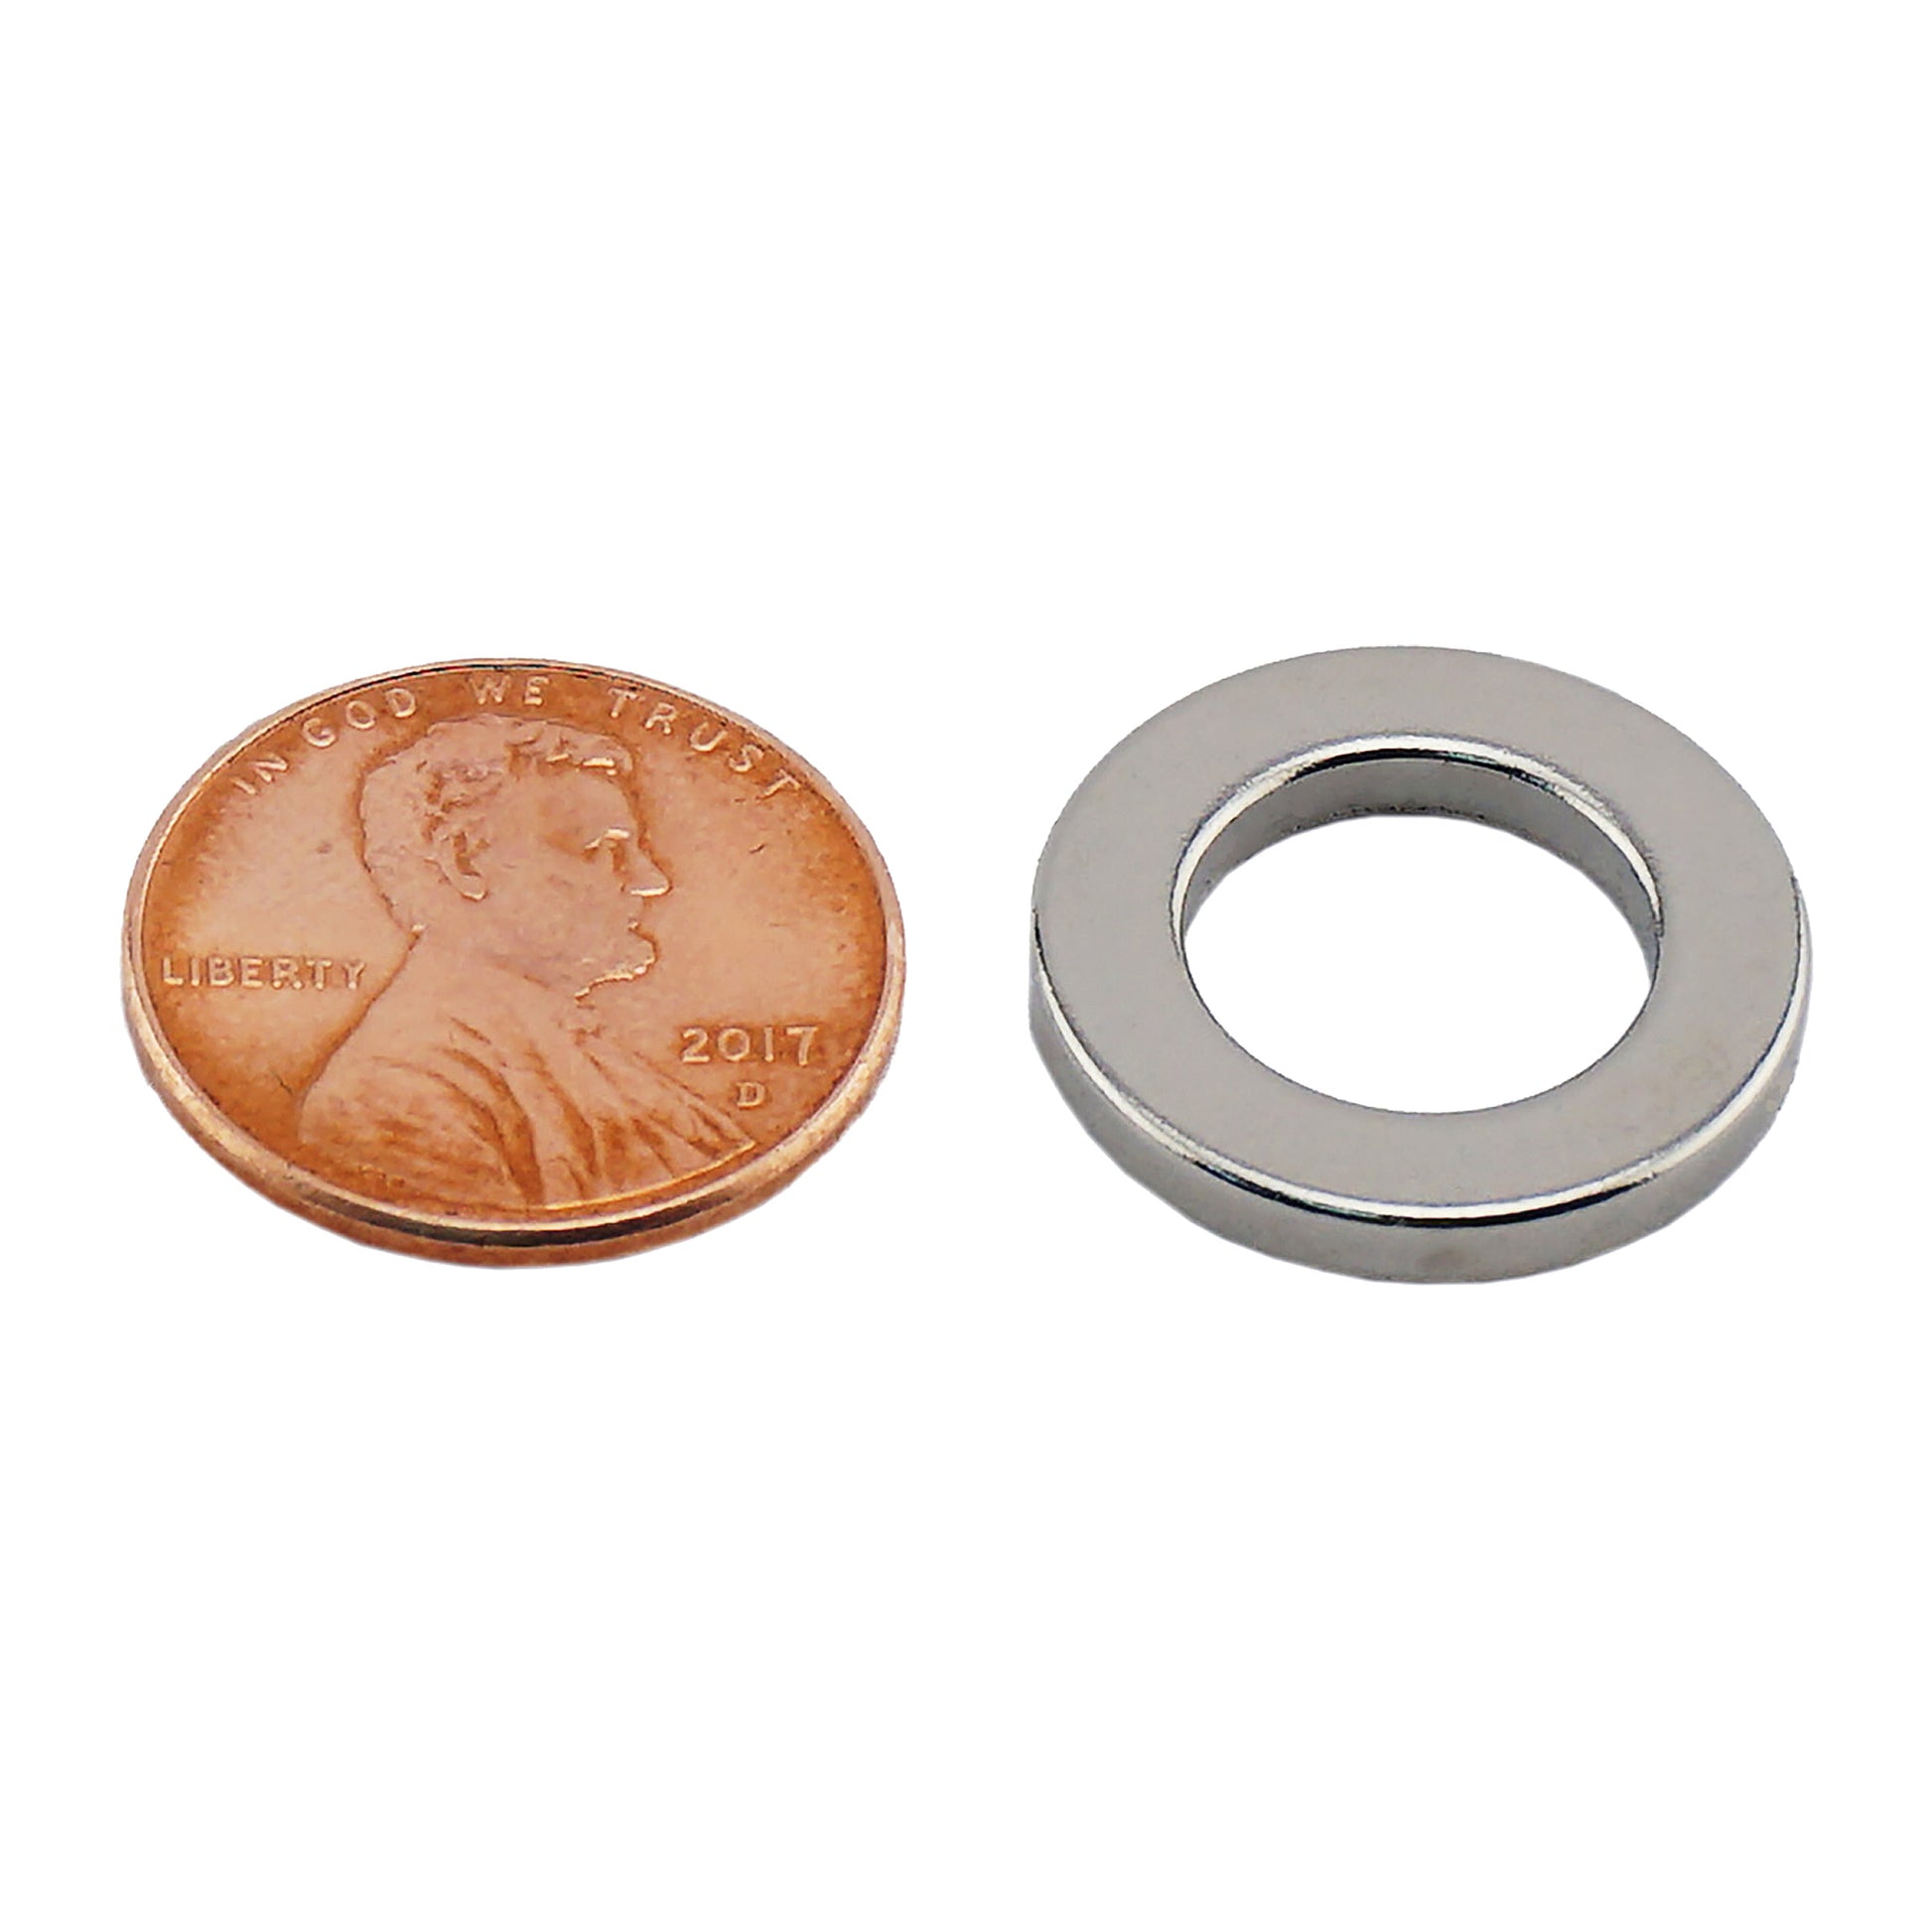 Load image into Gallery viewer, NR007405N Neodymium Ring Magnet - Compared to Penny for Size Reference